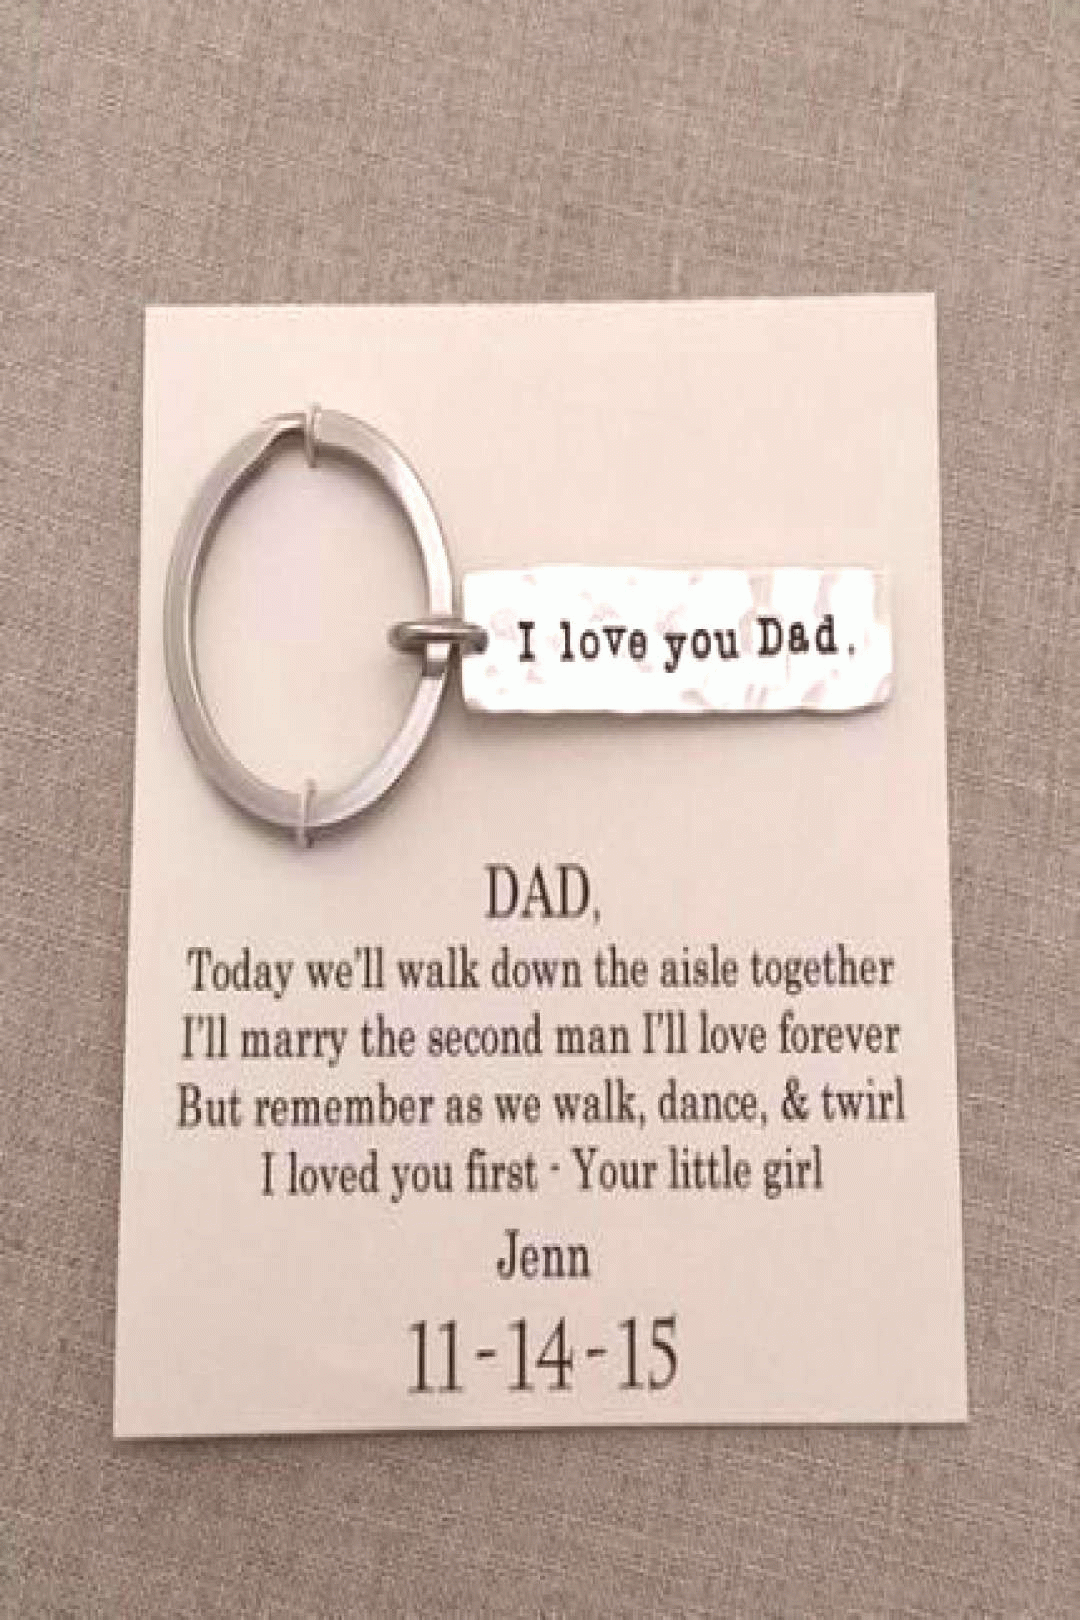 Wedding Gifts For Second Marriage Dads 56+  Ideas gifts for second marr... -  Wedding Gifts For Sec -   13 wedding Gifts for second marriage ideas